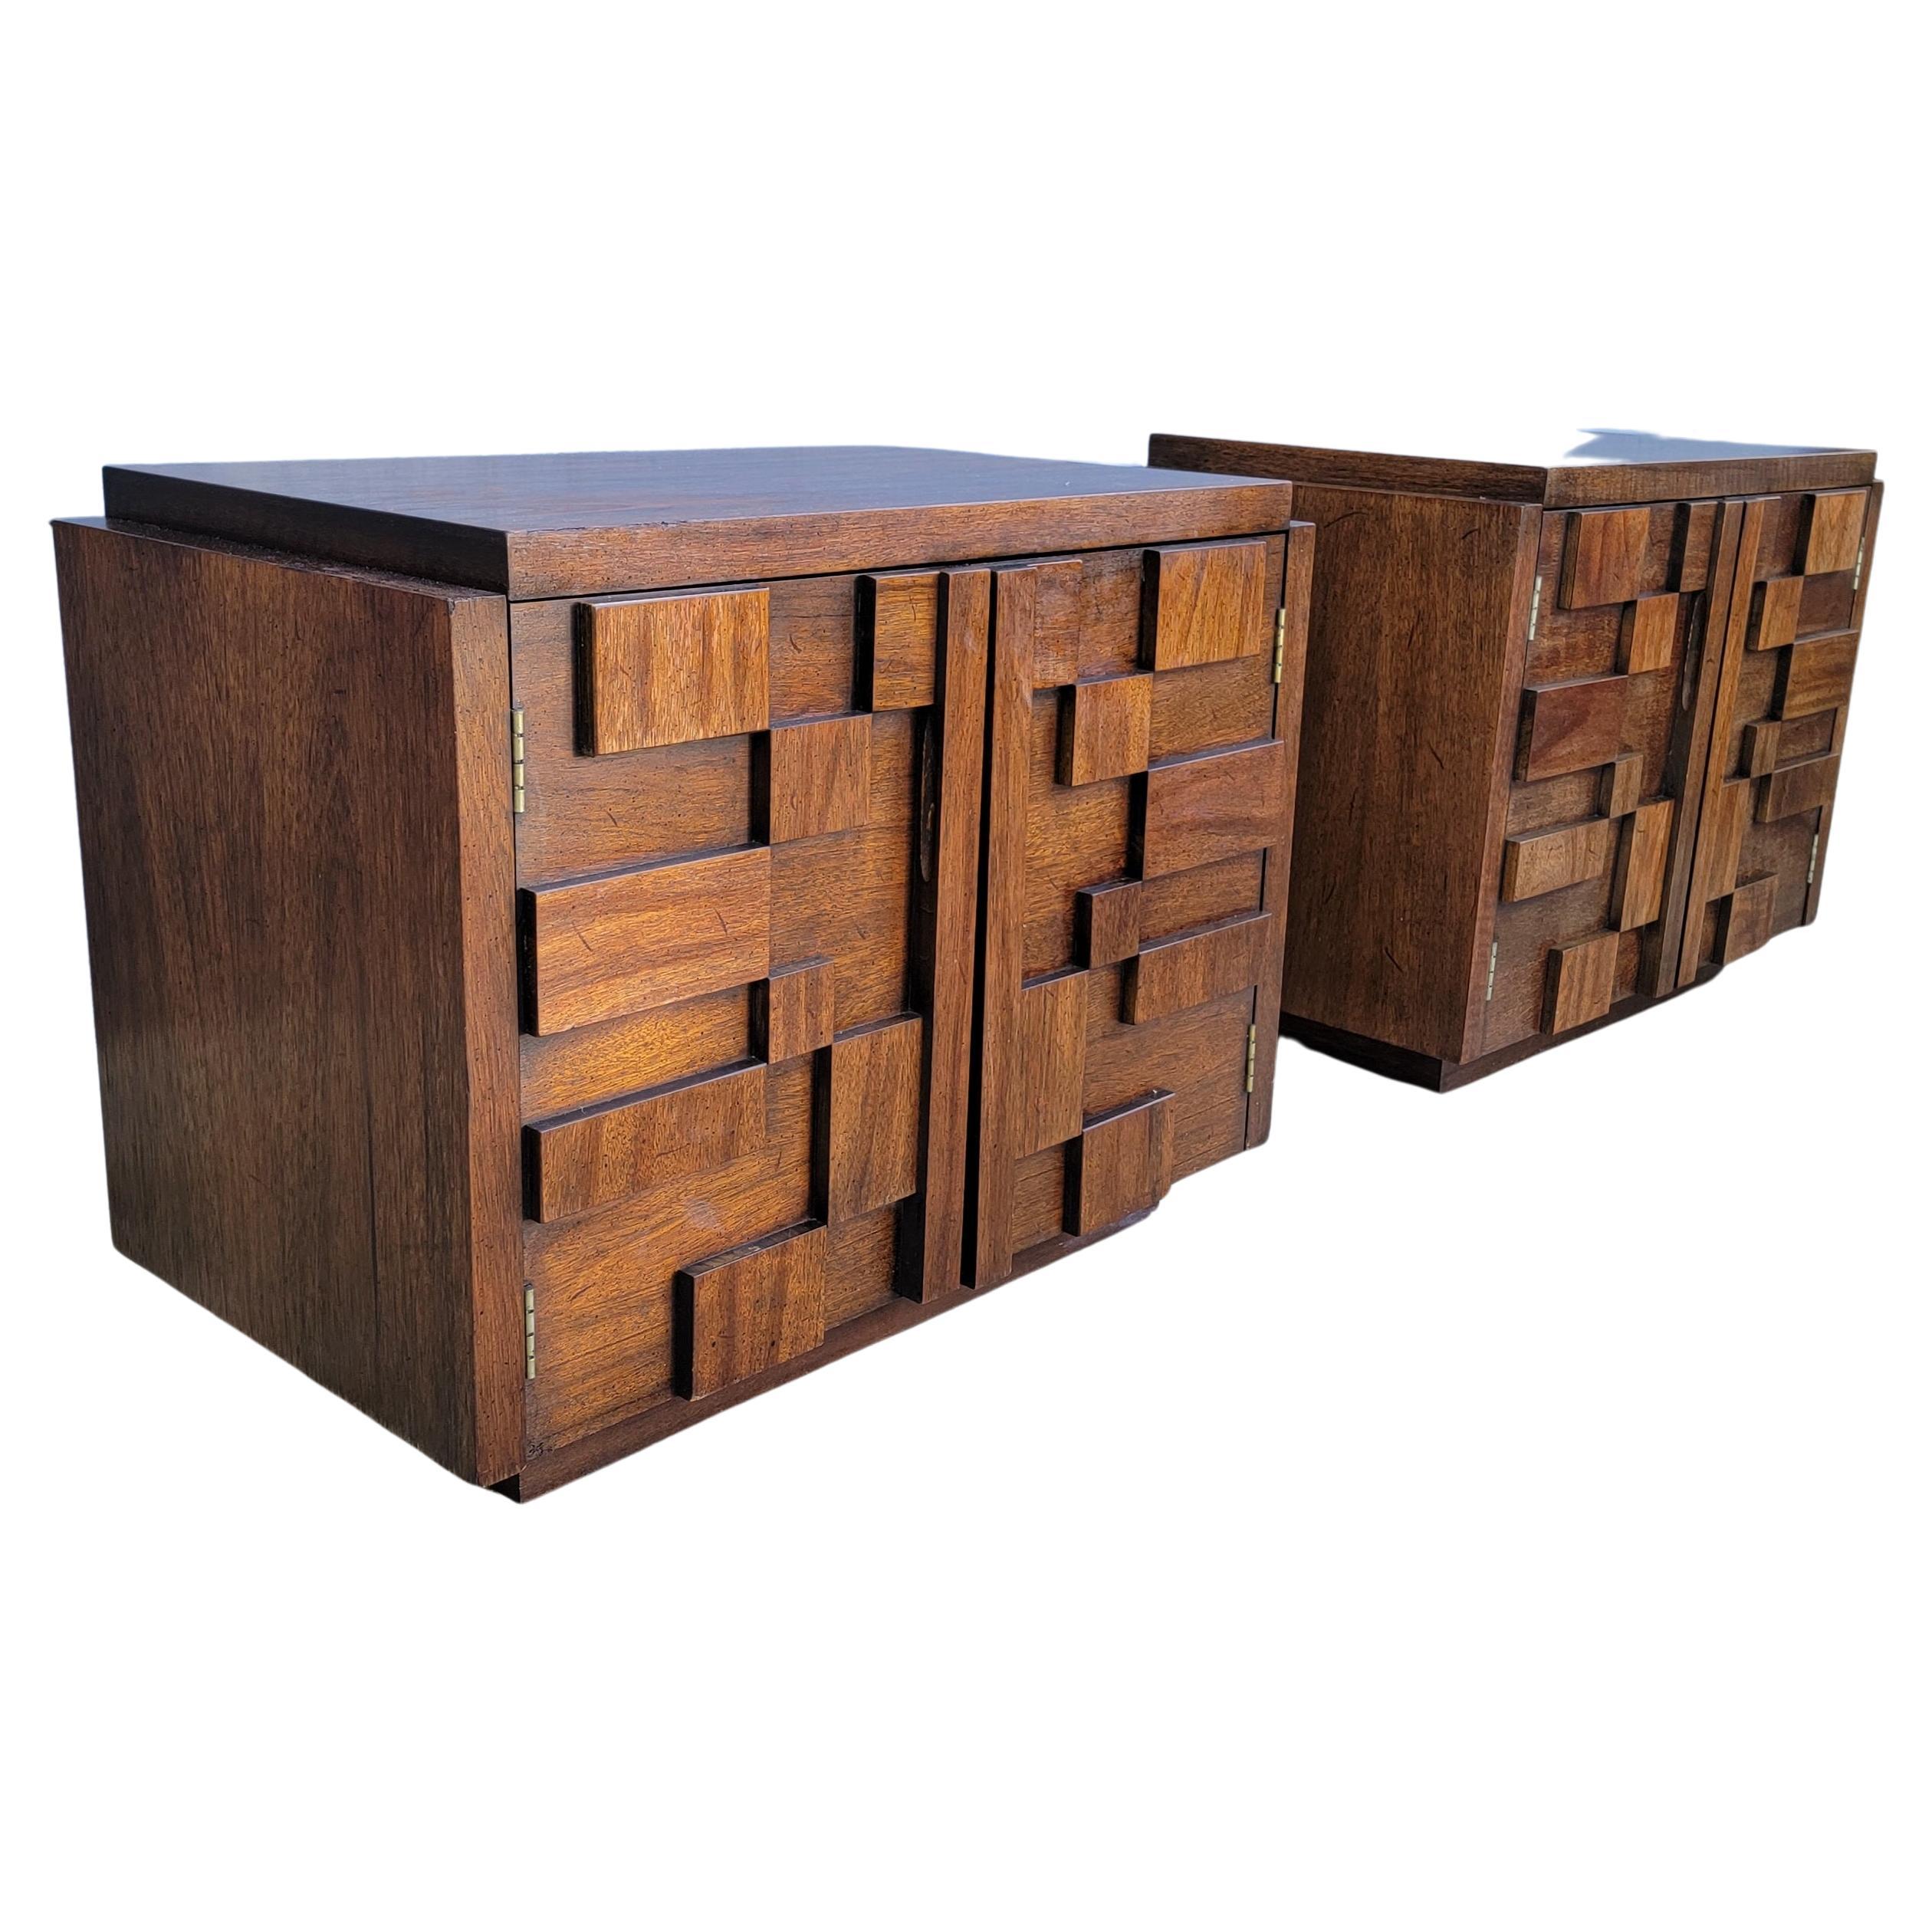 Brutalist Nightstands by Lane Furniture "Staccato" Line 1970's